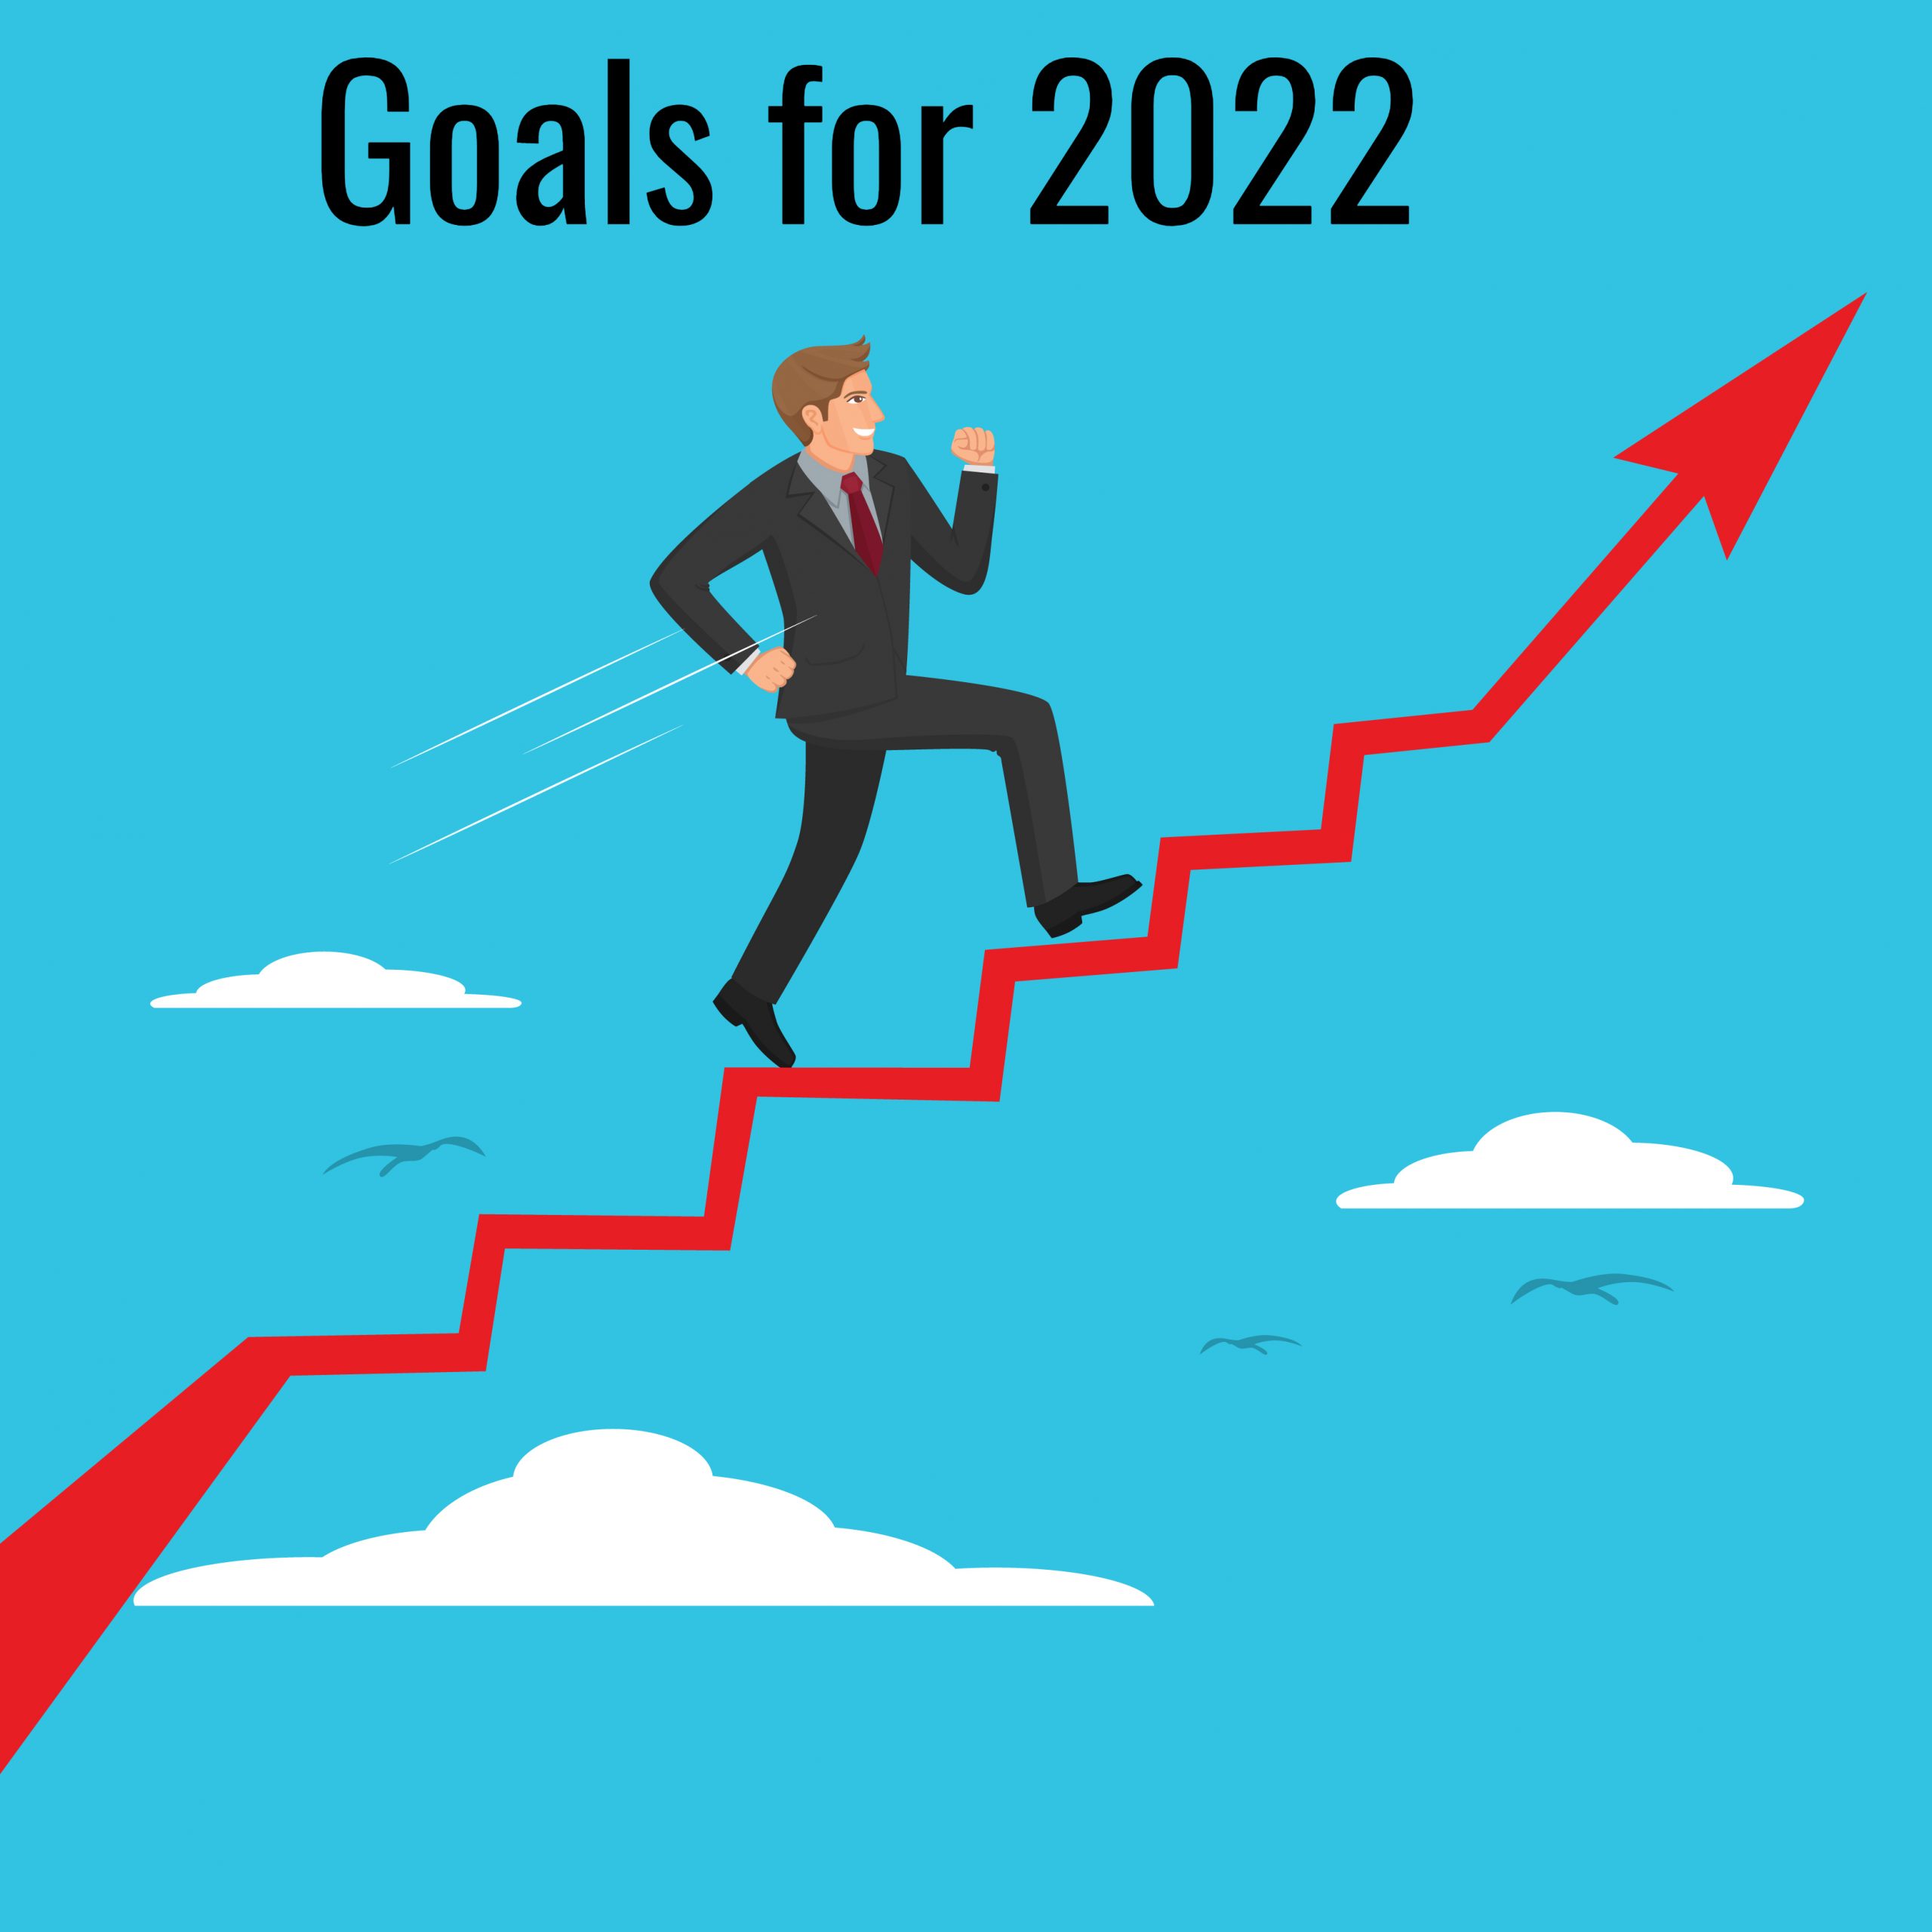 How New Real Estate Agents Can Set Their Goals for 2022